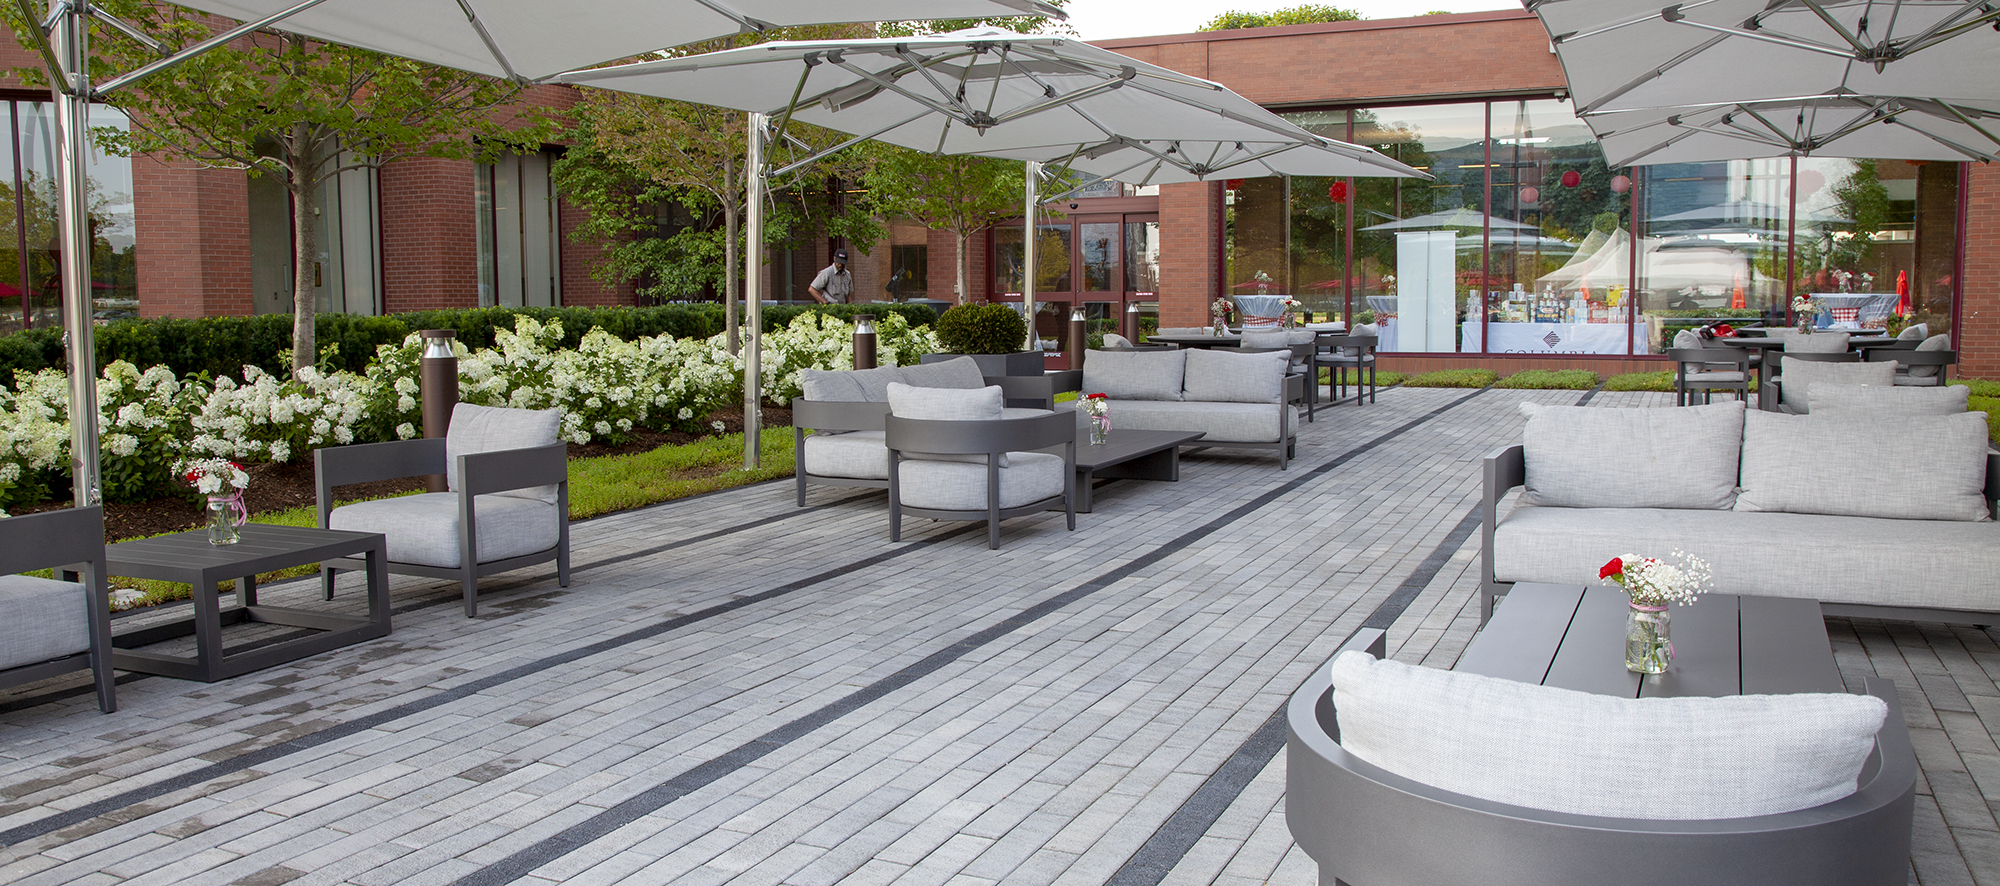 Two-toned Promenade Plank pavers delineate rows of walking spaces, with outdoor tables, chairs and umbrellas .